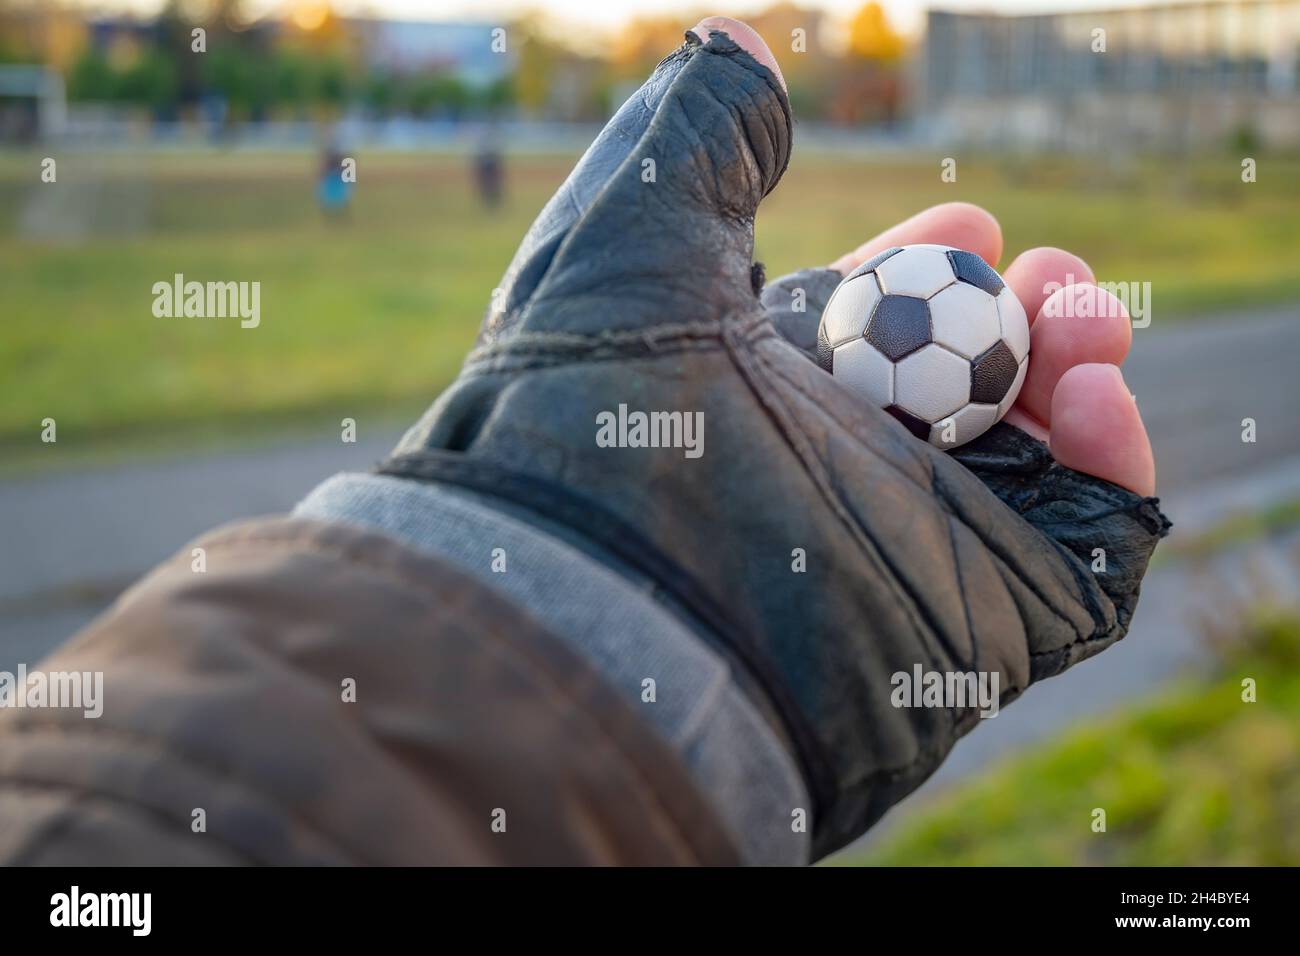 a small decorative ball, a symbol of football, in the outstretched hand of a man in a leather glove against the background of a football field Stock Photo